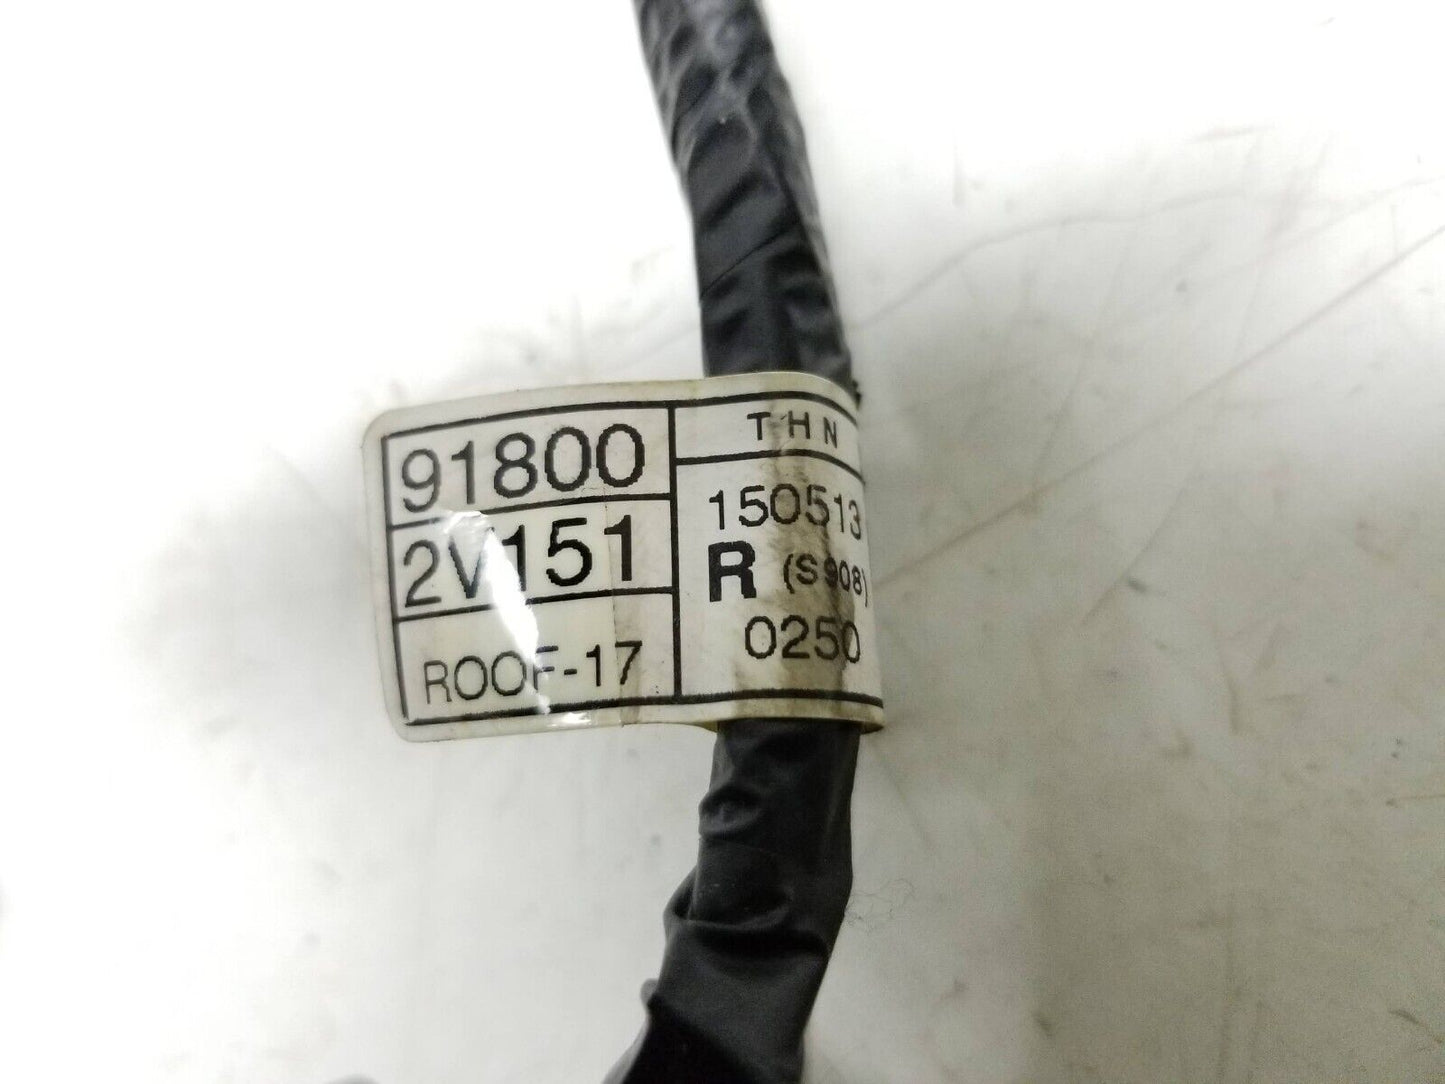 12 13 14 15 16 Hyundai Veloster Roof Wire Wiring Harness 91800-2v151 OEM